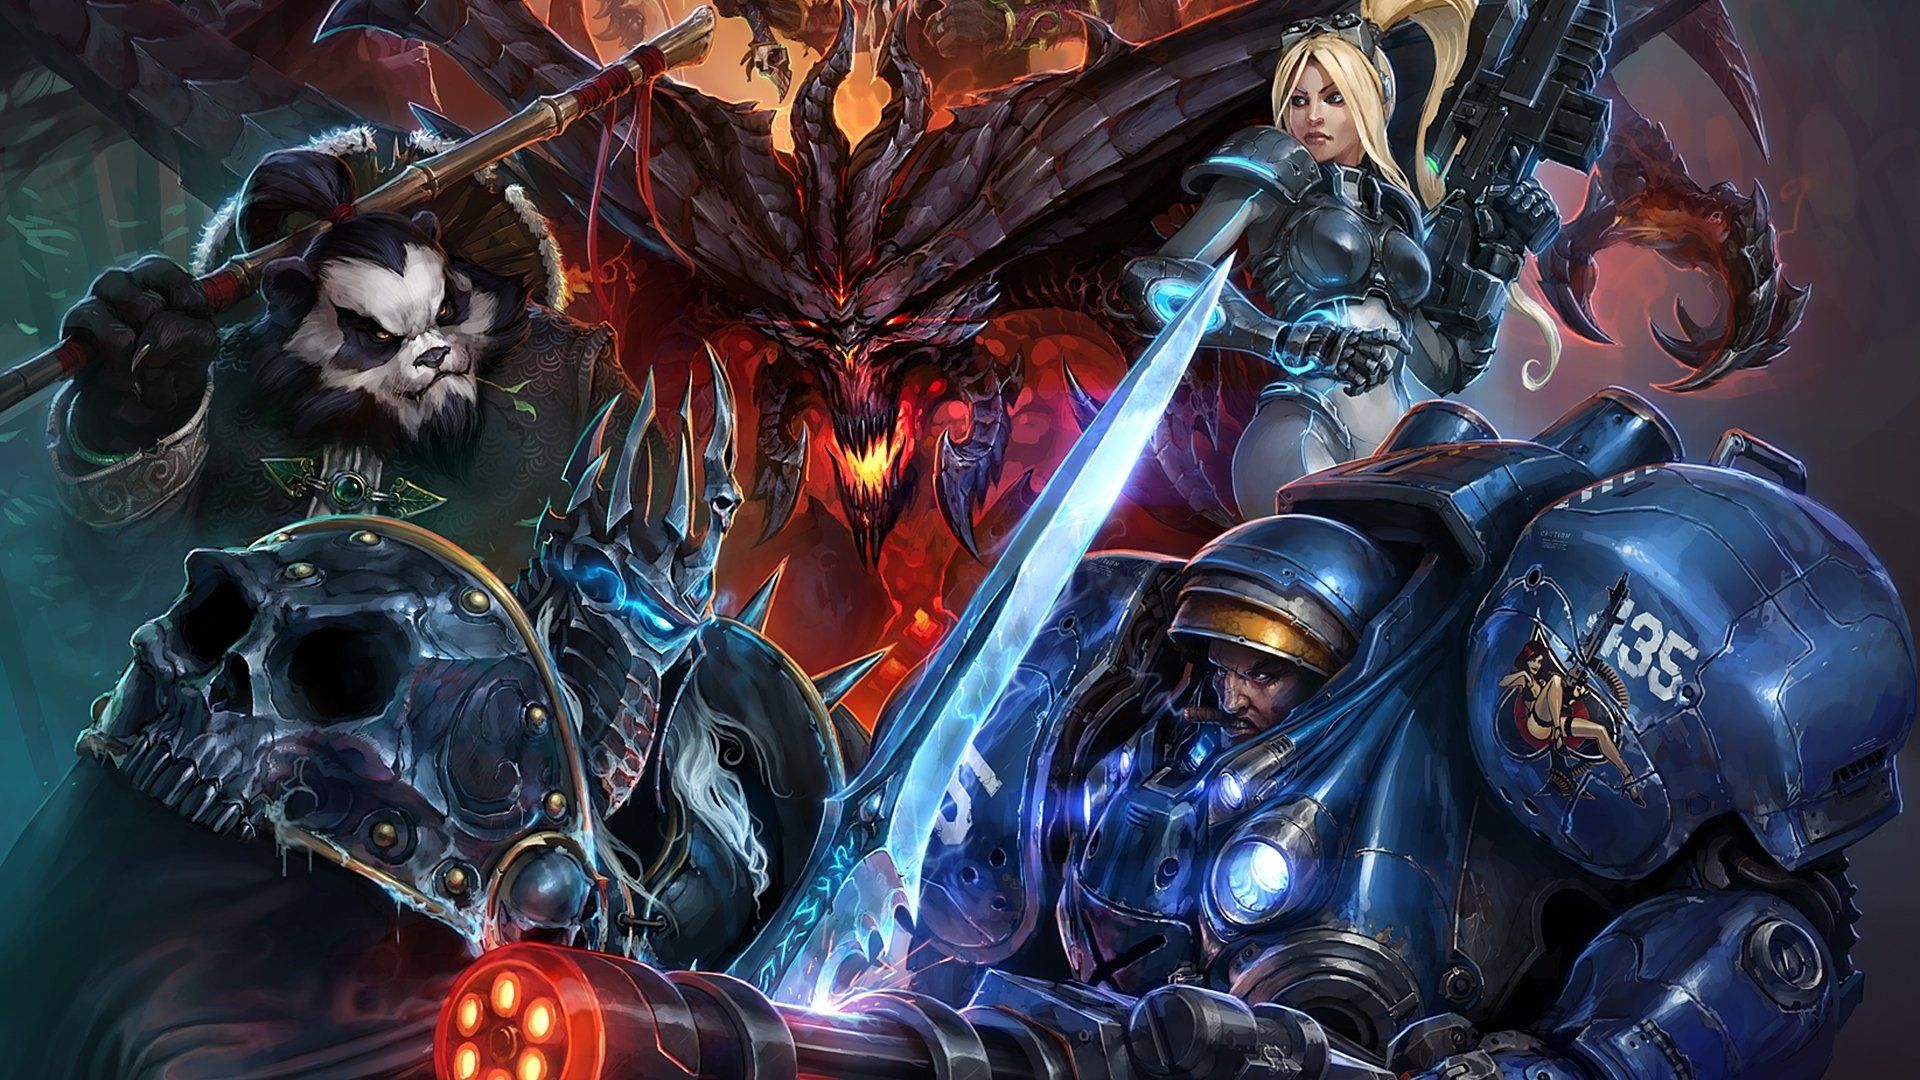 Blizzard stopping support for Heroes of the Storm esports